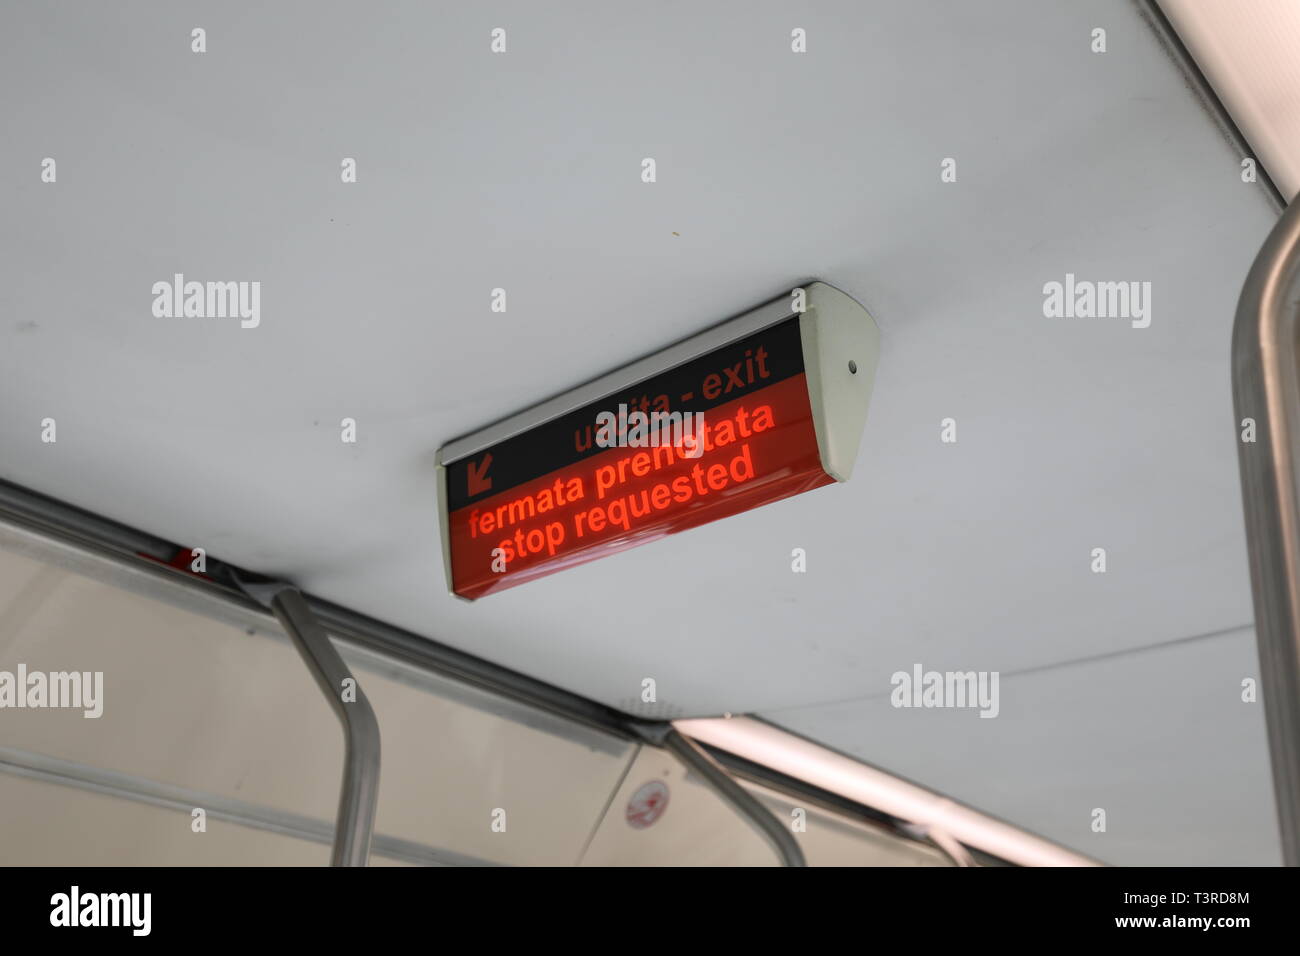 light signal with italian text FERMATA PRENOTATA that means Stop request in italian language on the tram of the city Stock Photo